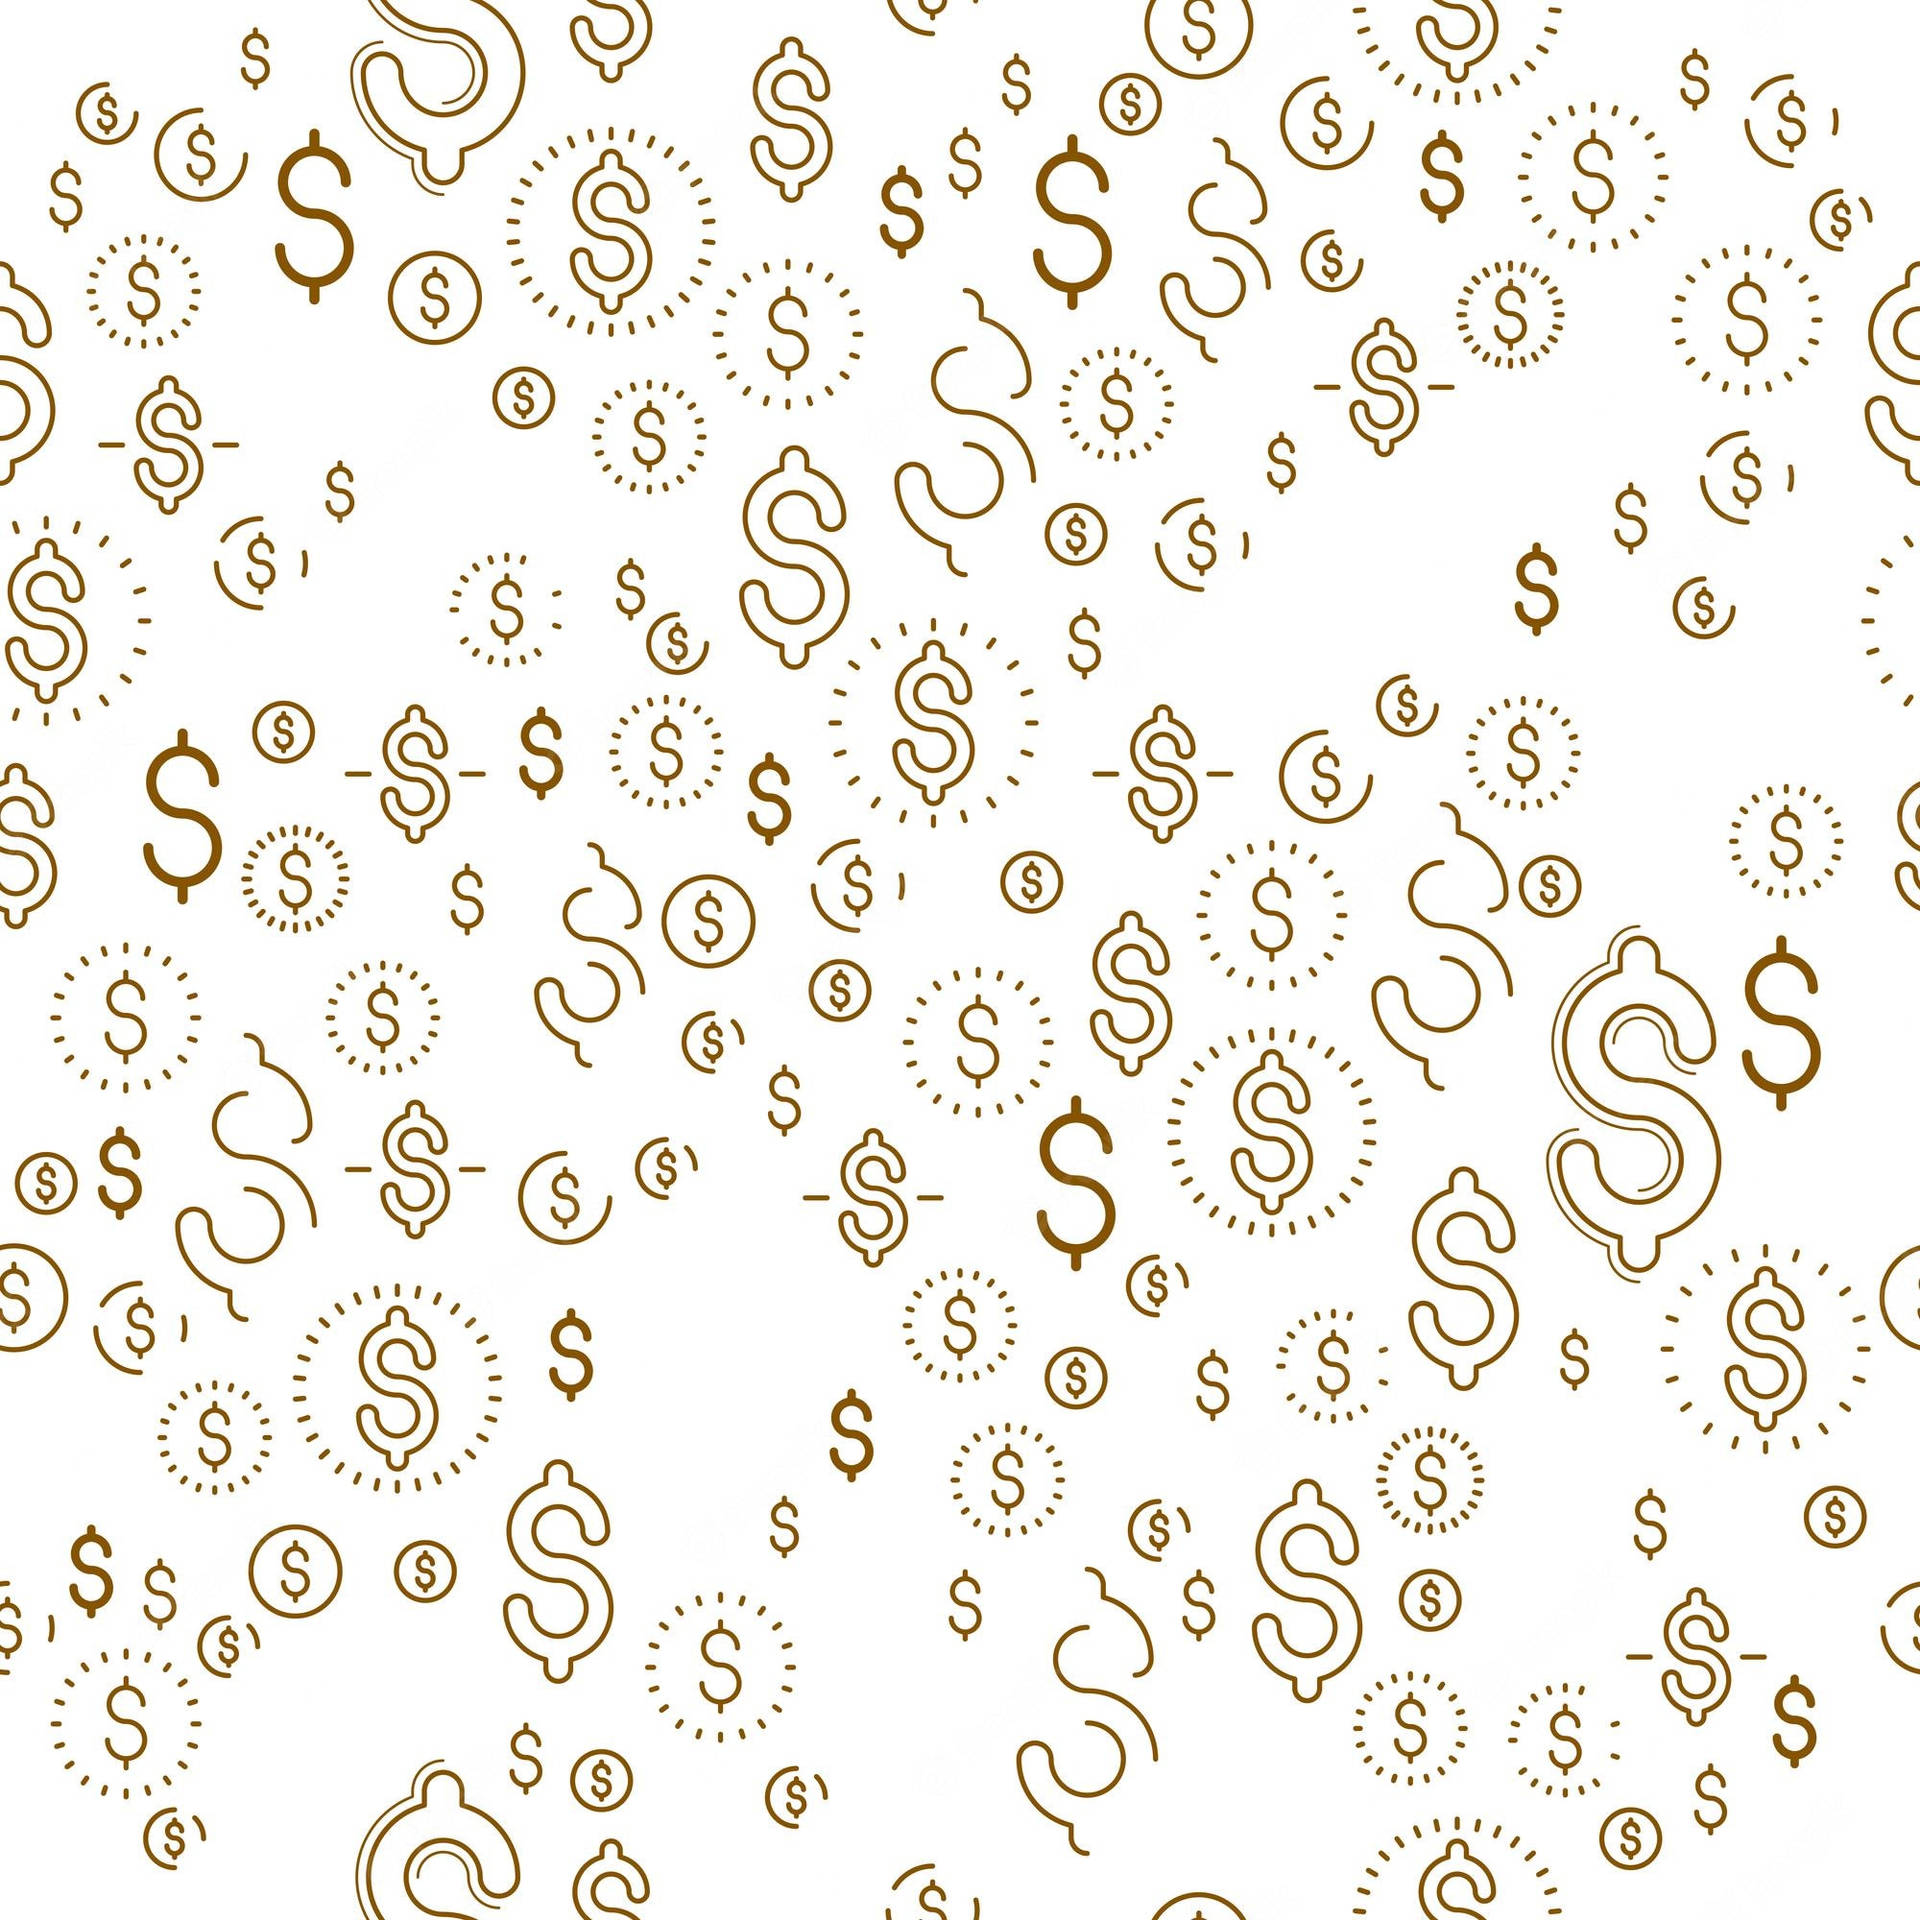 A Seamless Pattern Of Dollar Signs Wallpaper